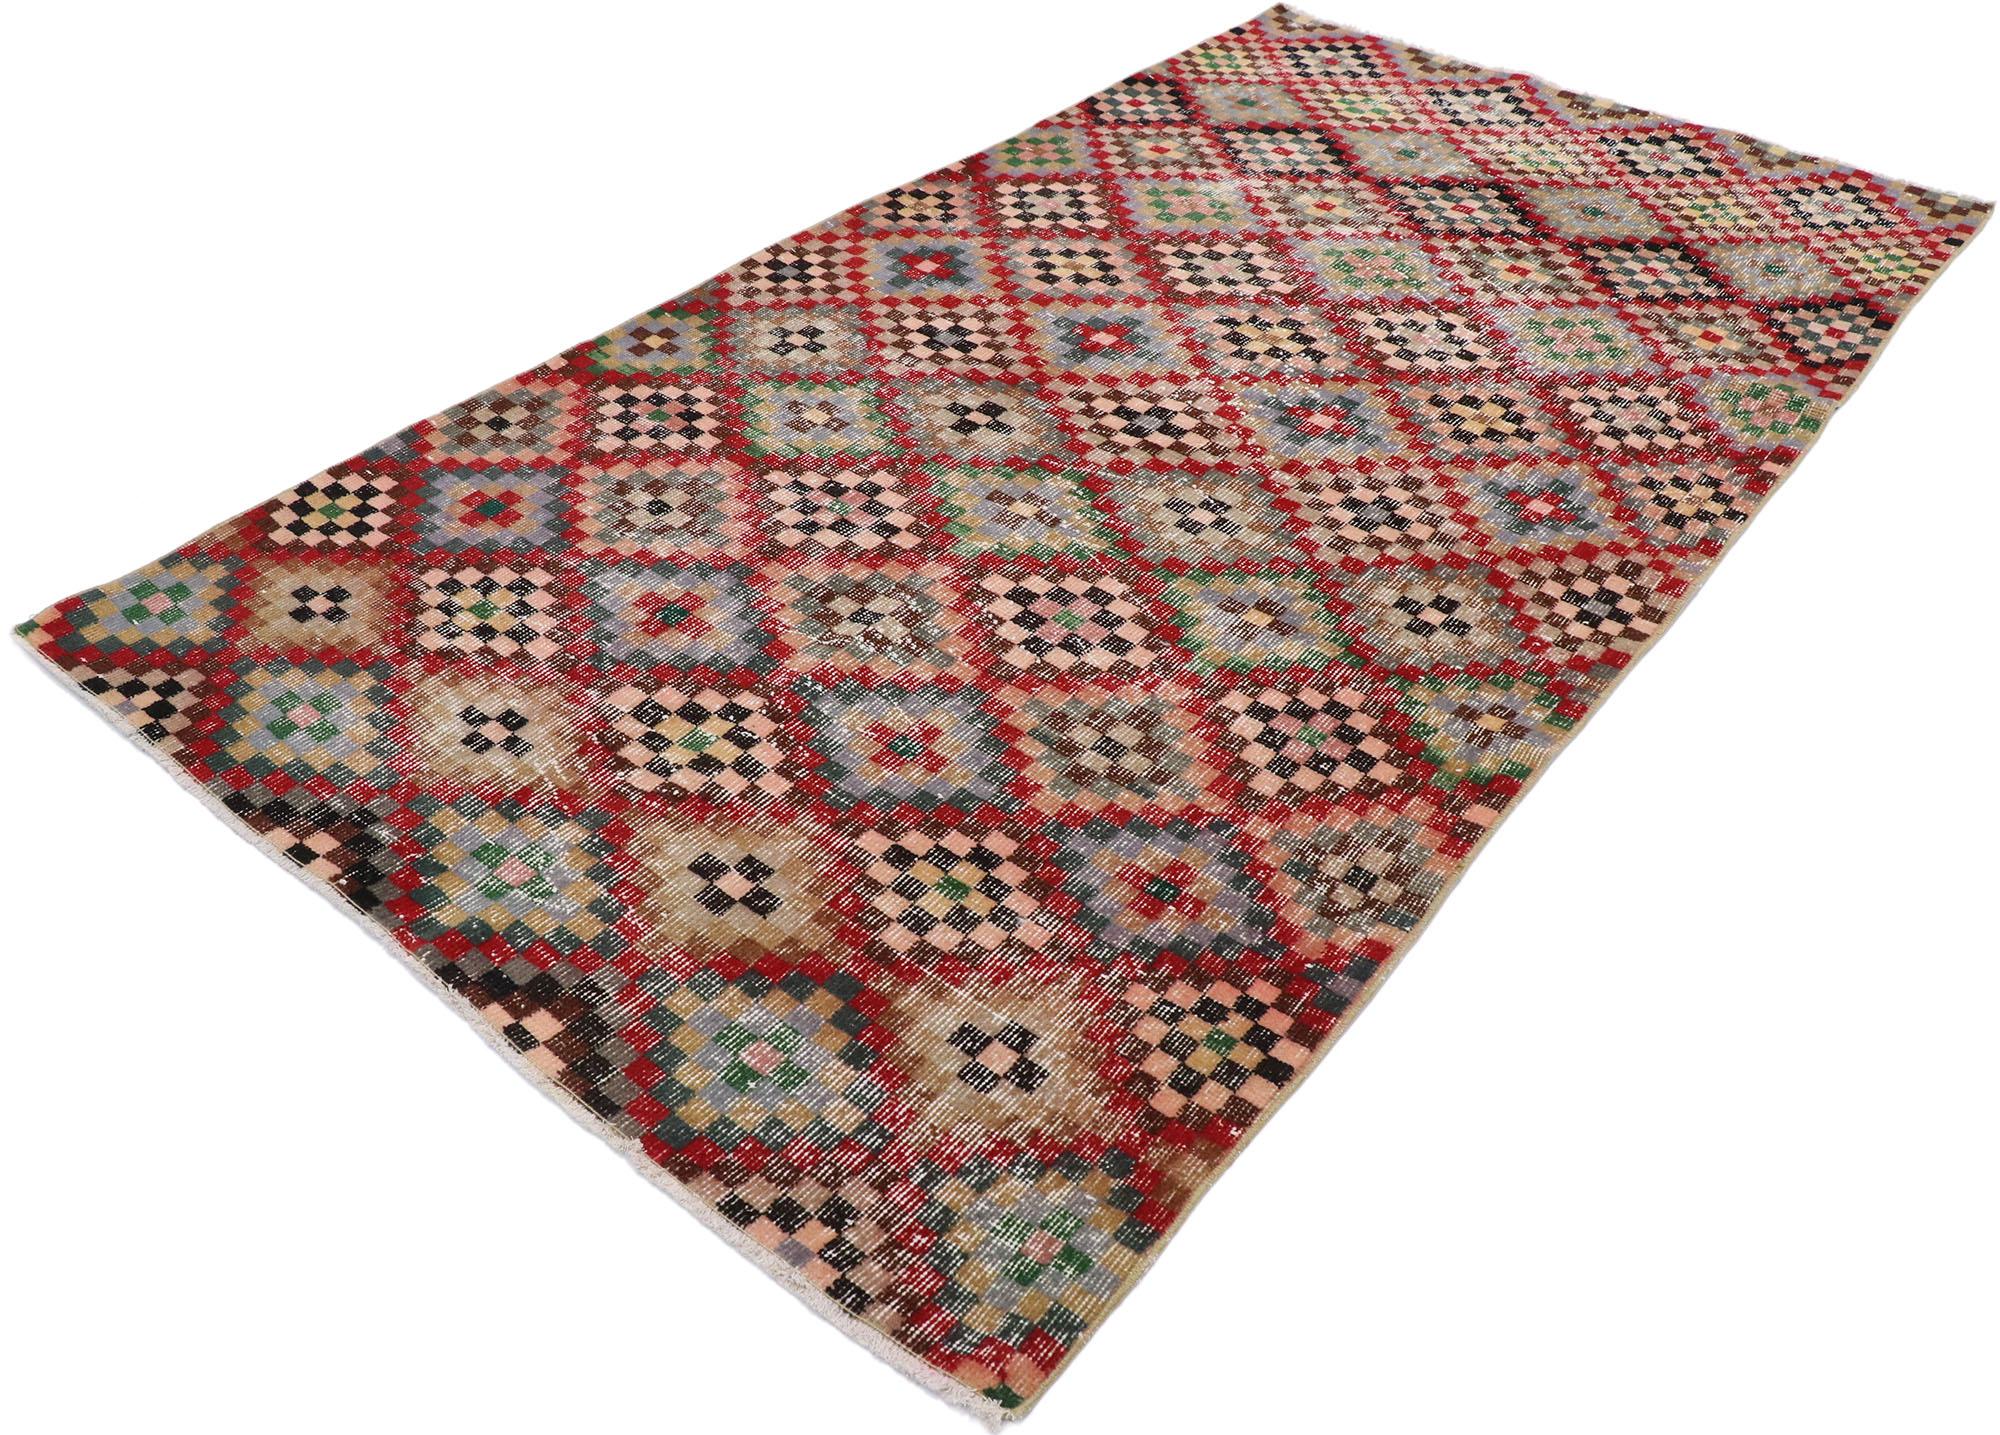 53283 distressed vintage Turkish Sivas rug with Modern Cubist style. This hand knotted wool distressed vintage Turkish Sivas rug features a lively all-over multicolored checkered lattice pattern. The cubist-inspired pattern is simple, yet effective.